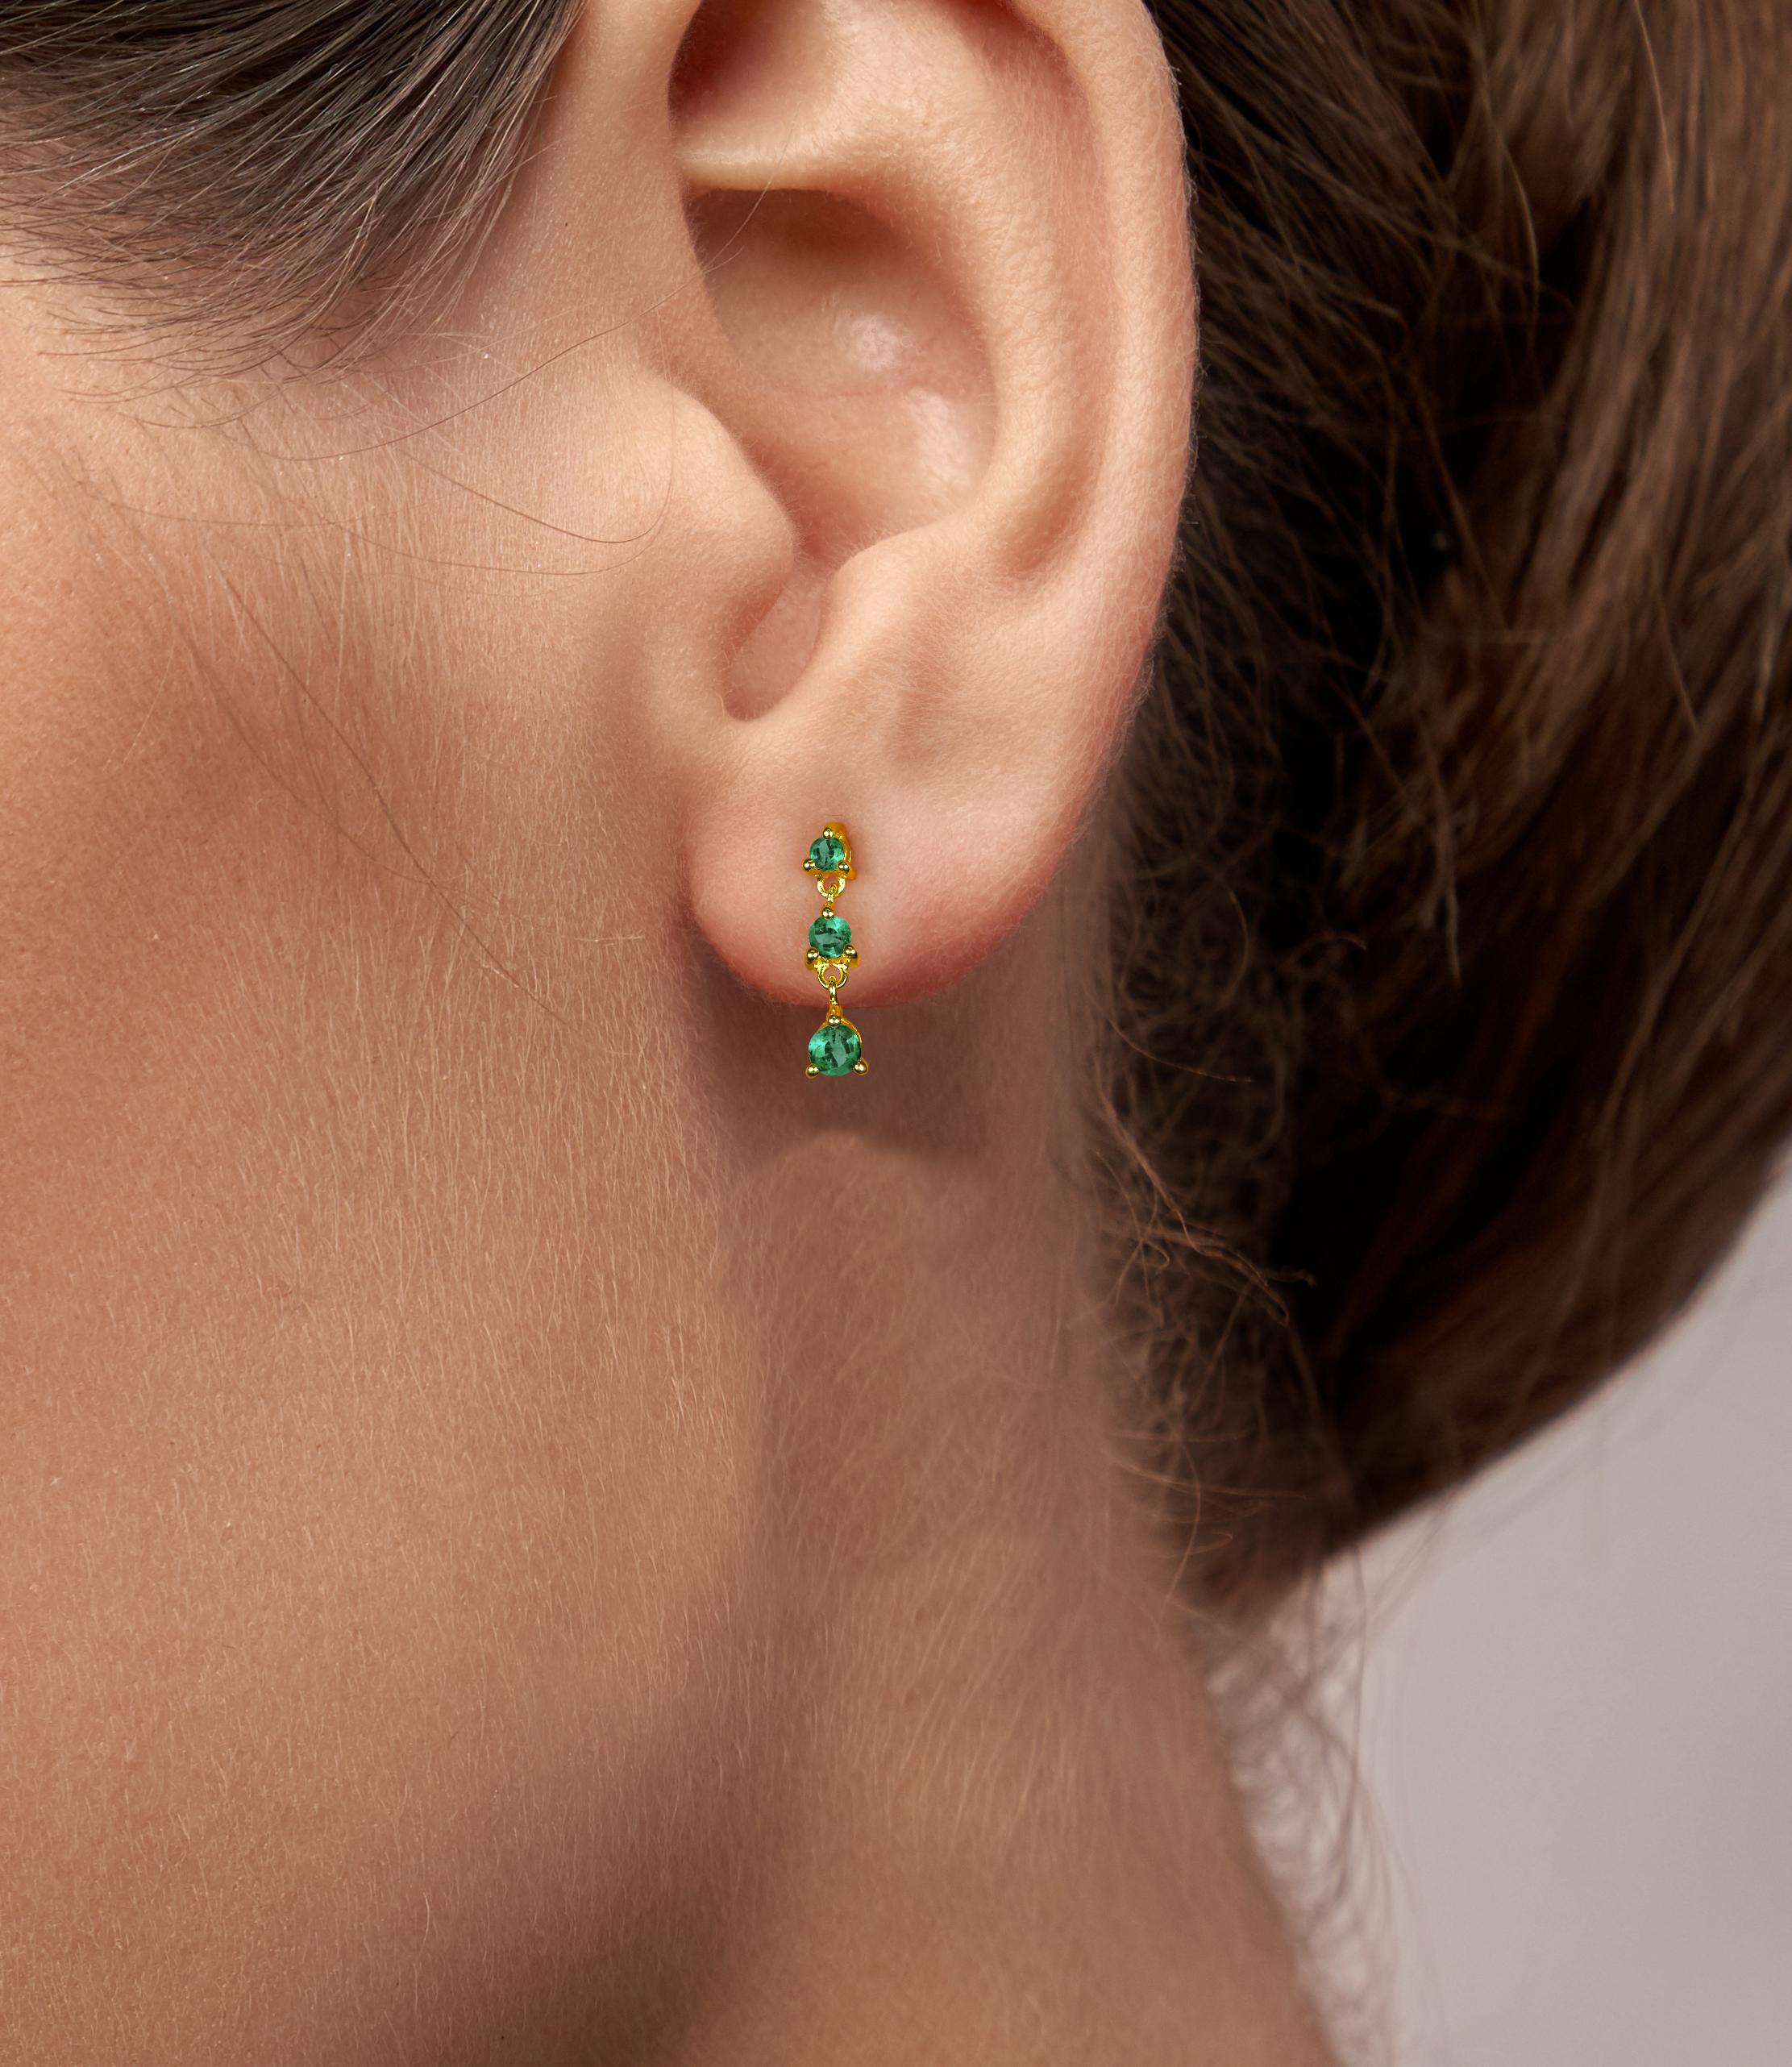 0.45ct Emerald Studs Earrings in 18k Gold For Sale 2